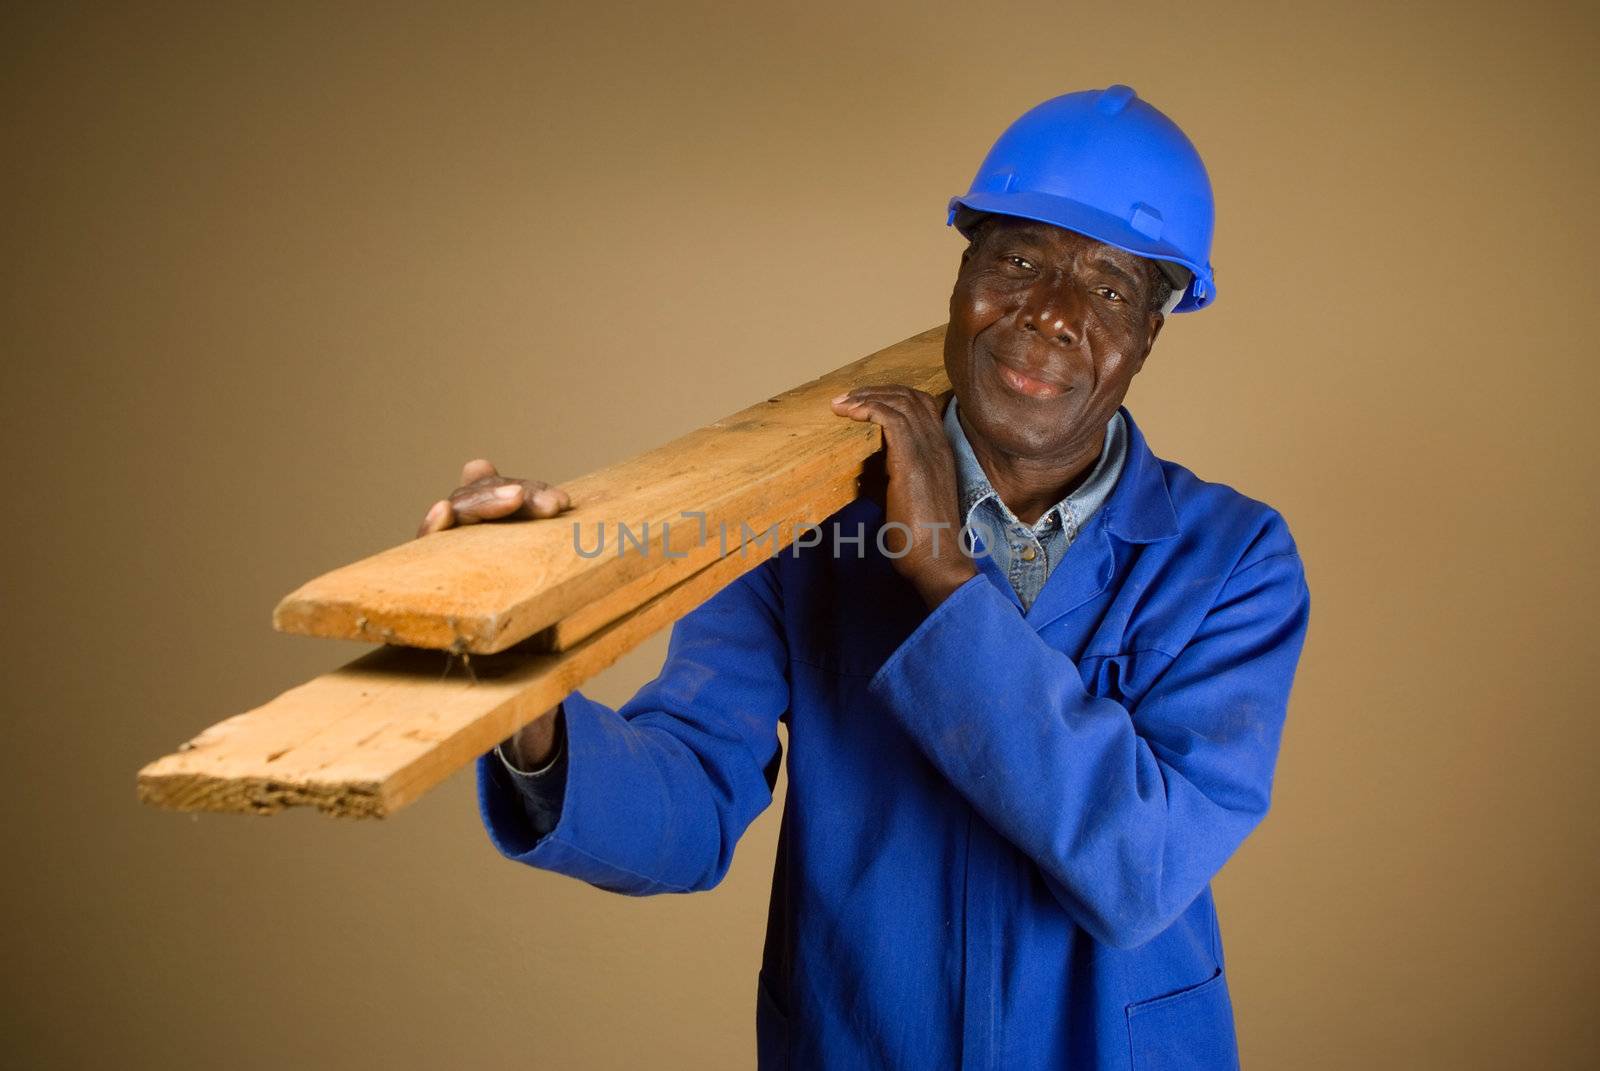 Senior South African or American plumber, carpenter or builder with wooden planks